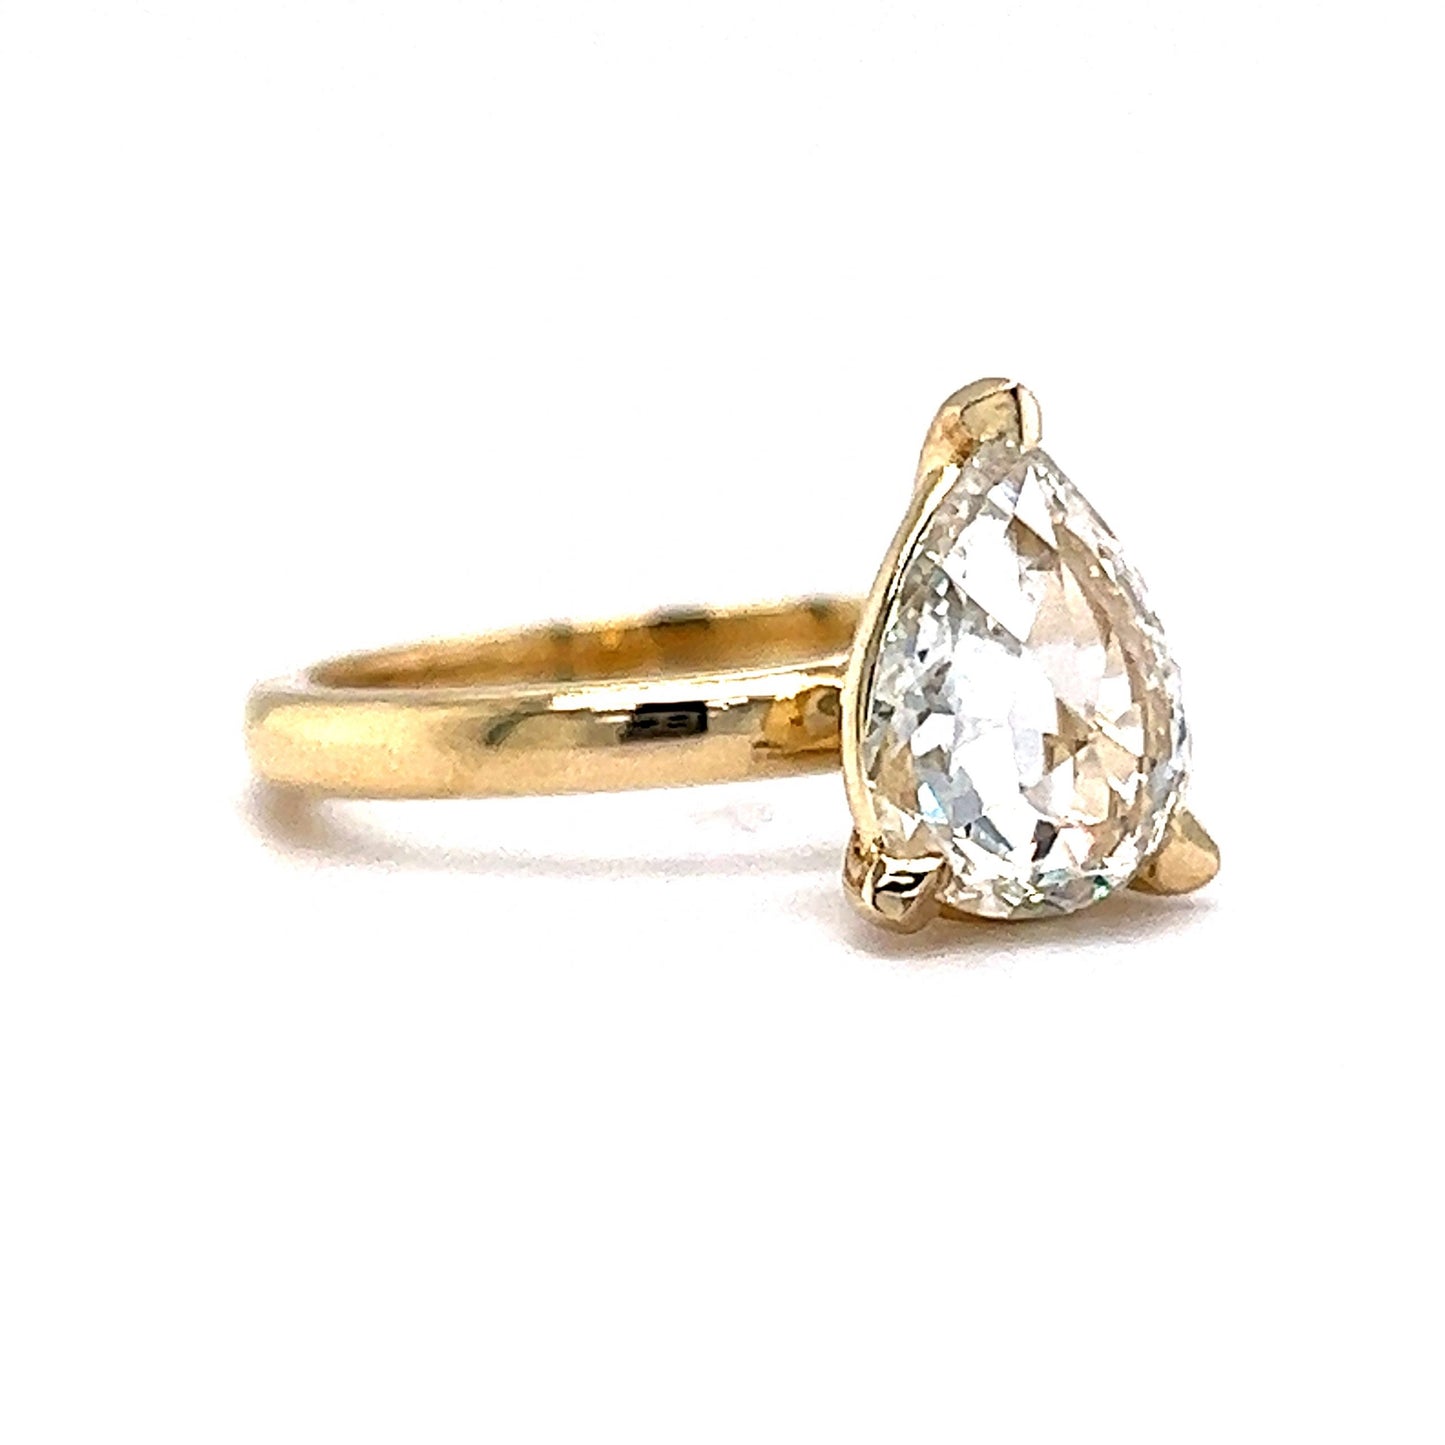 1.72 Solitaire Rose Pear Cut Diamond Engagement Ring in 14k Gold